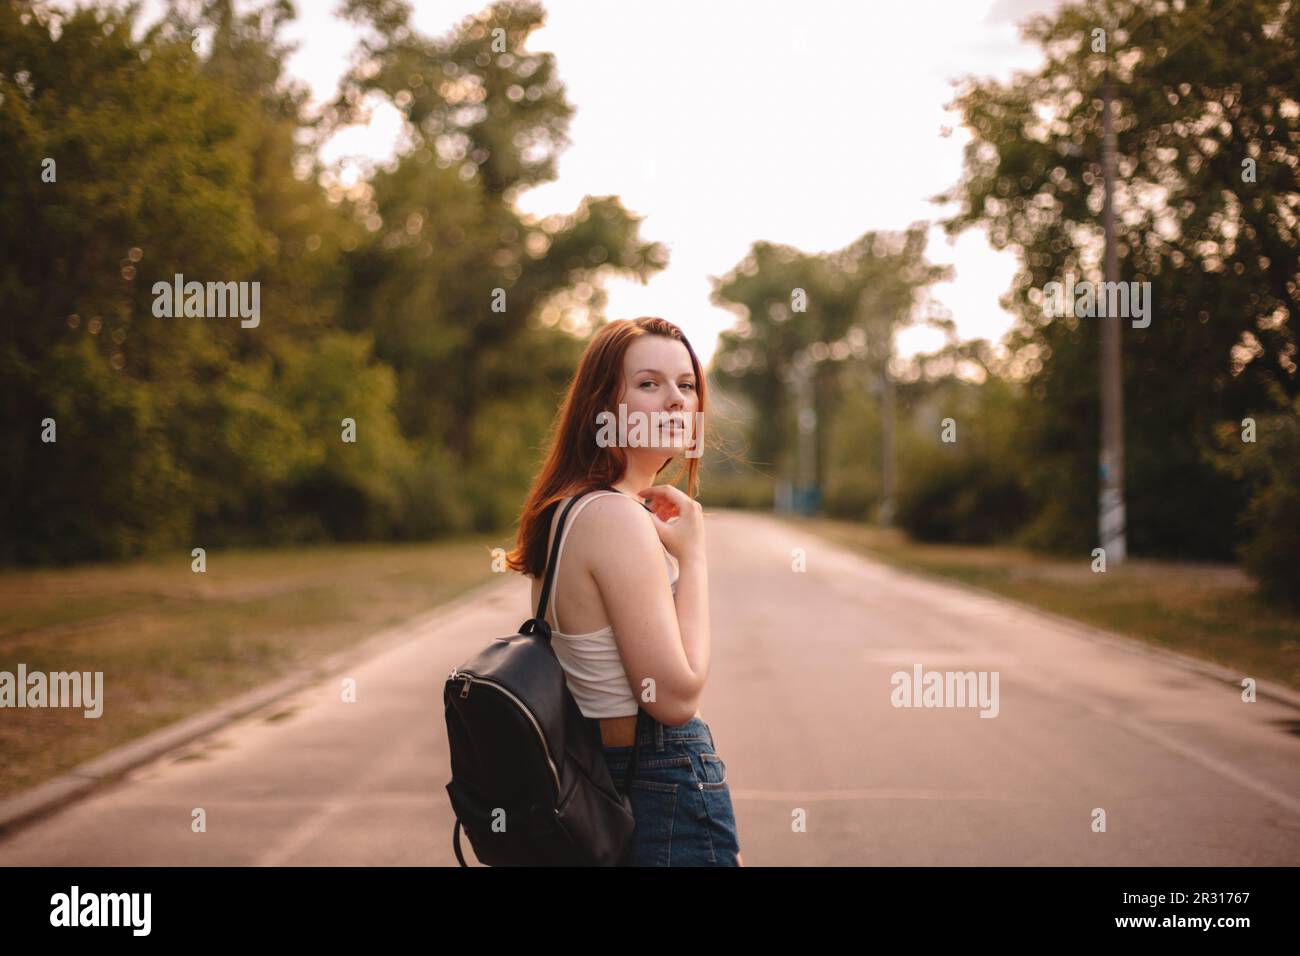 Young woman walking on country road Stock Photo